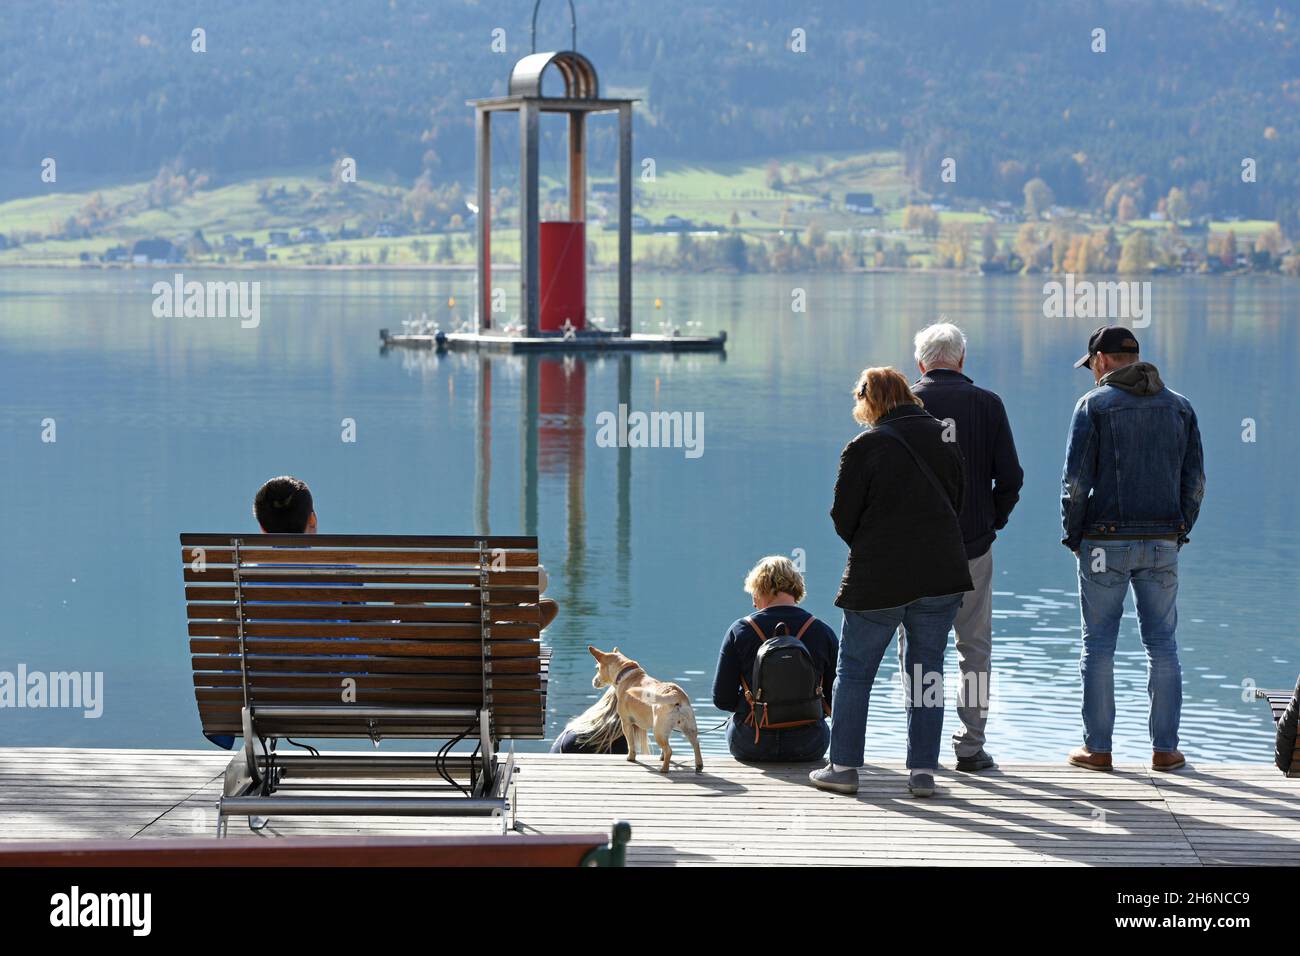 Urlauber am Ufer des Wolfgangsees im Herbst in Sankt Wolfgang, Oberösterreich, Österreich, Europa - Vacationers on the shores of Lake Wolfgang in autu Stock Photo